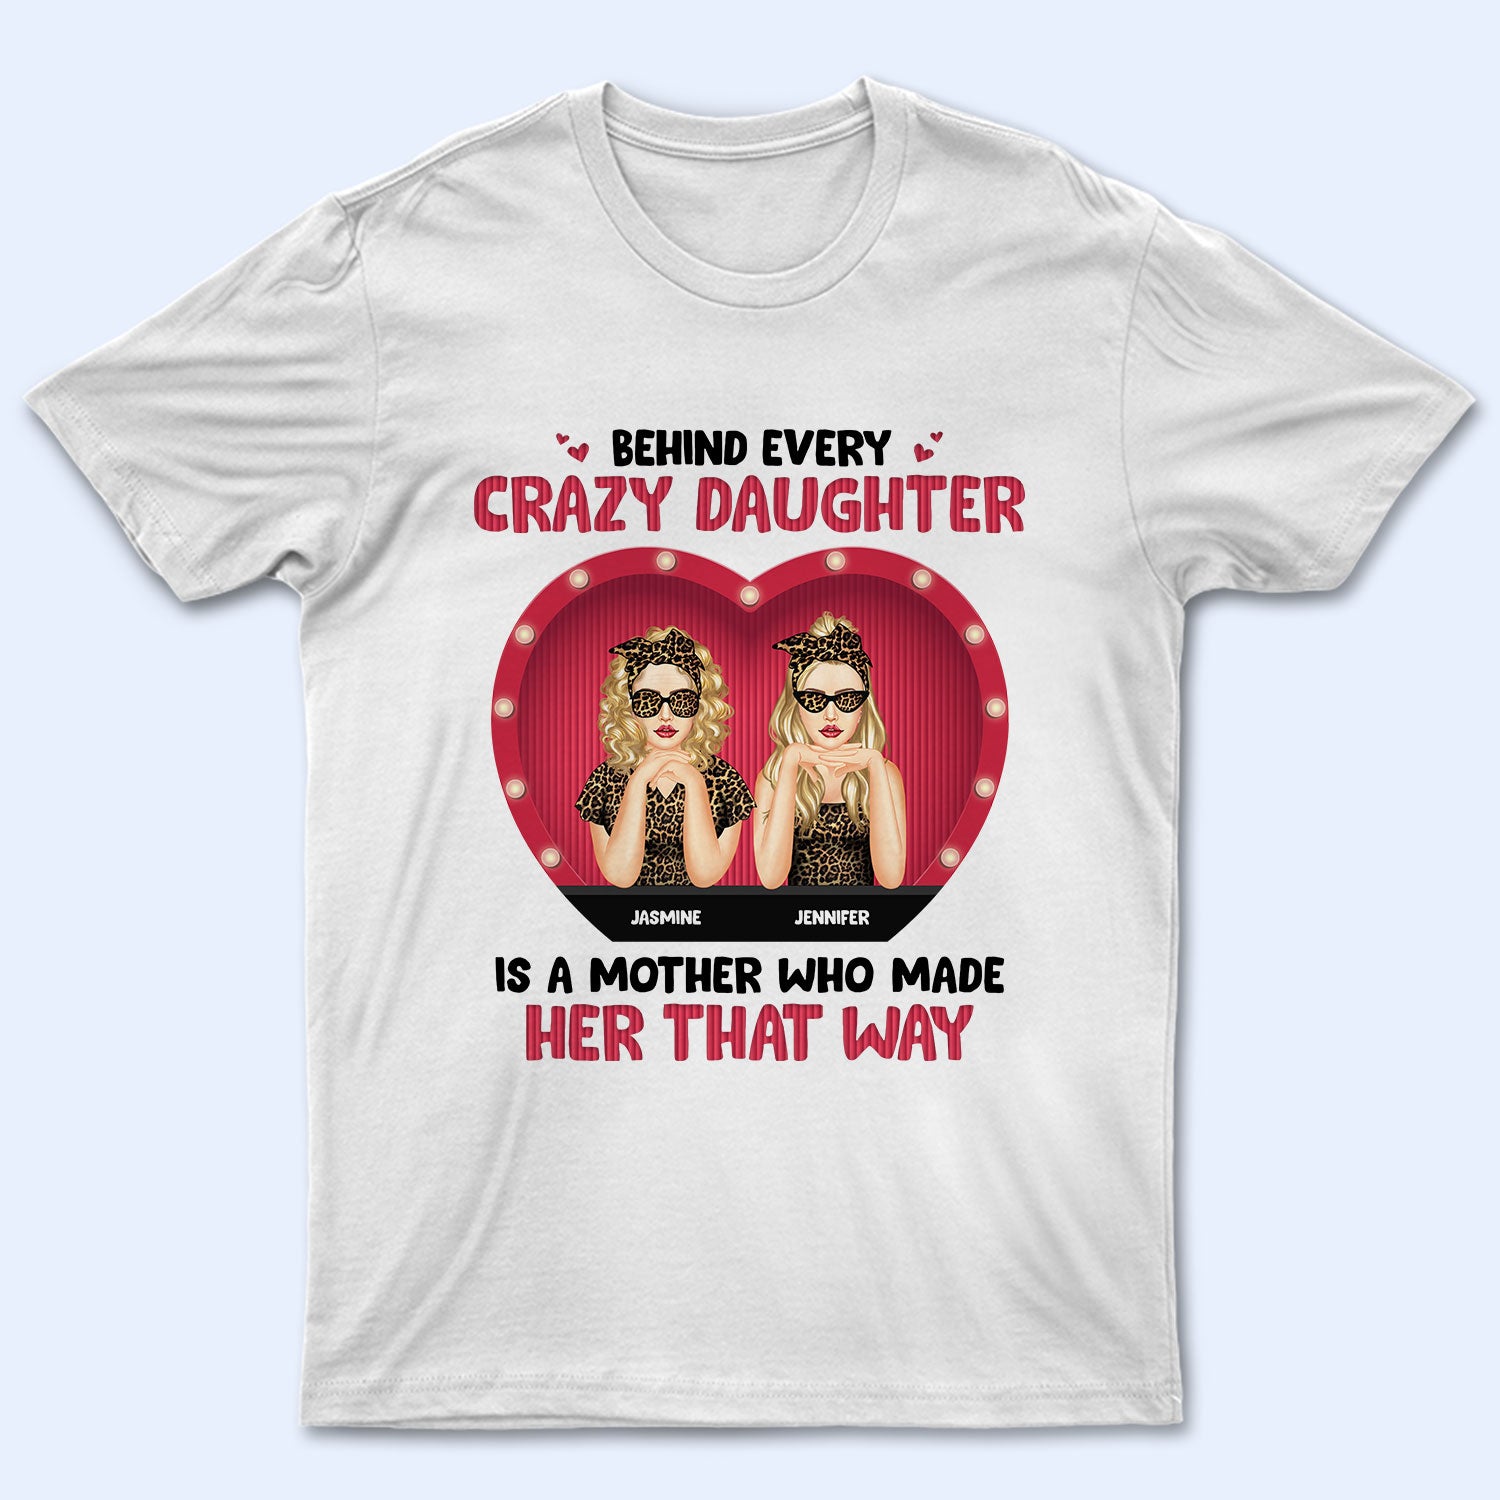 Behind Every Crazy Daughter - Gift For Mother - Personalized Custom T Shirt